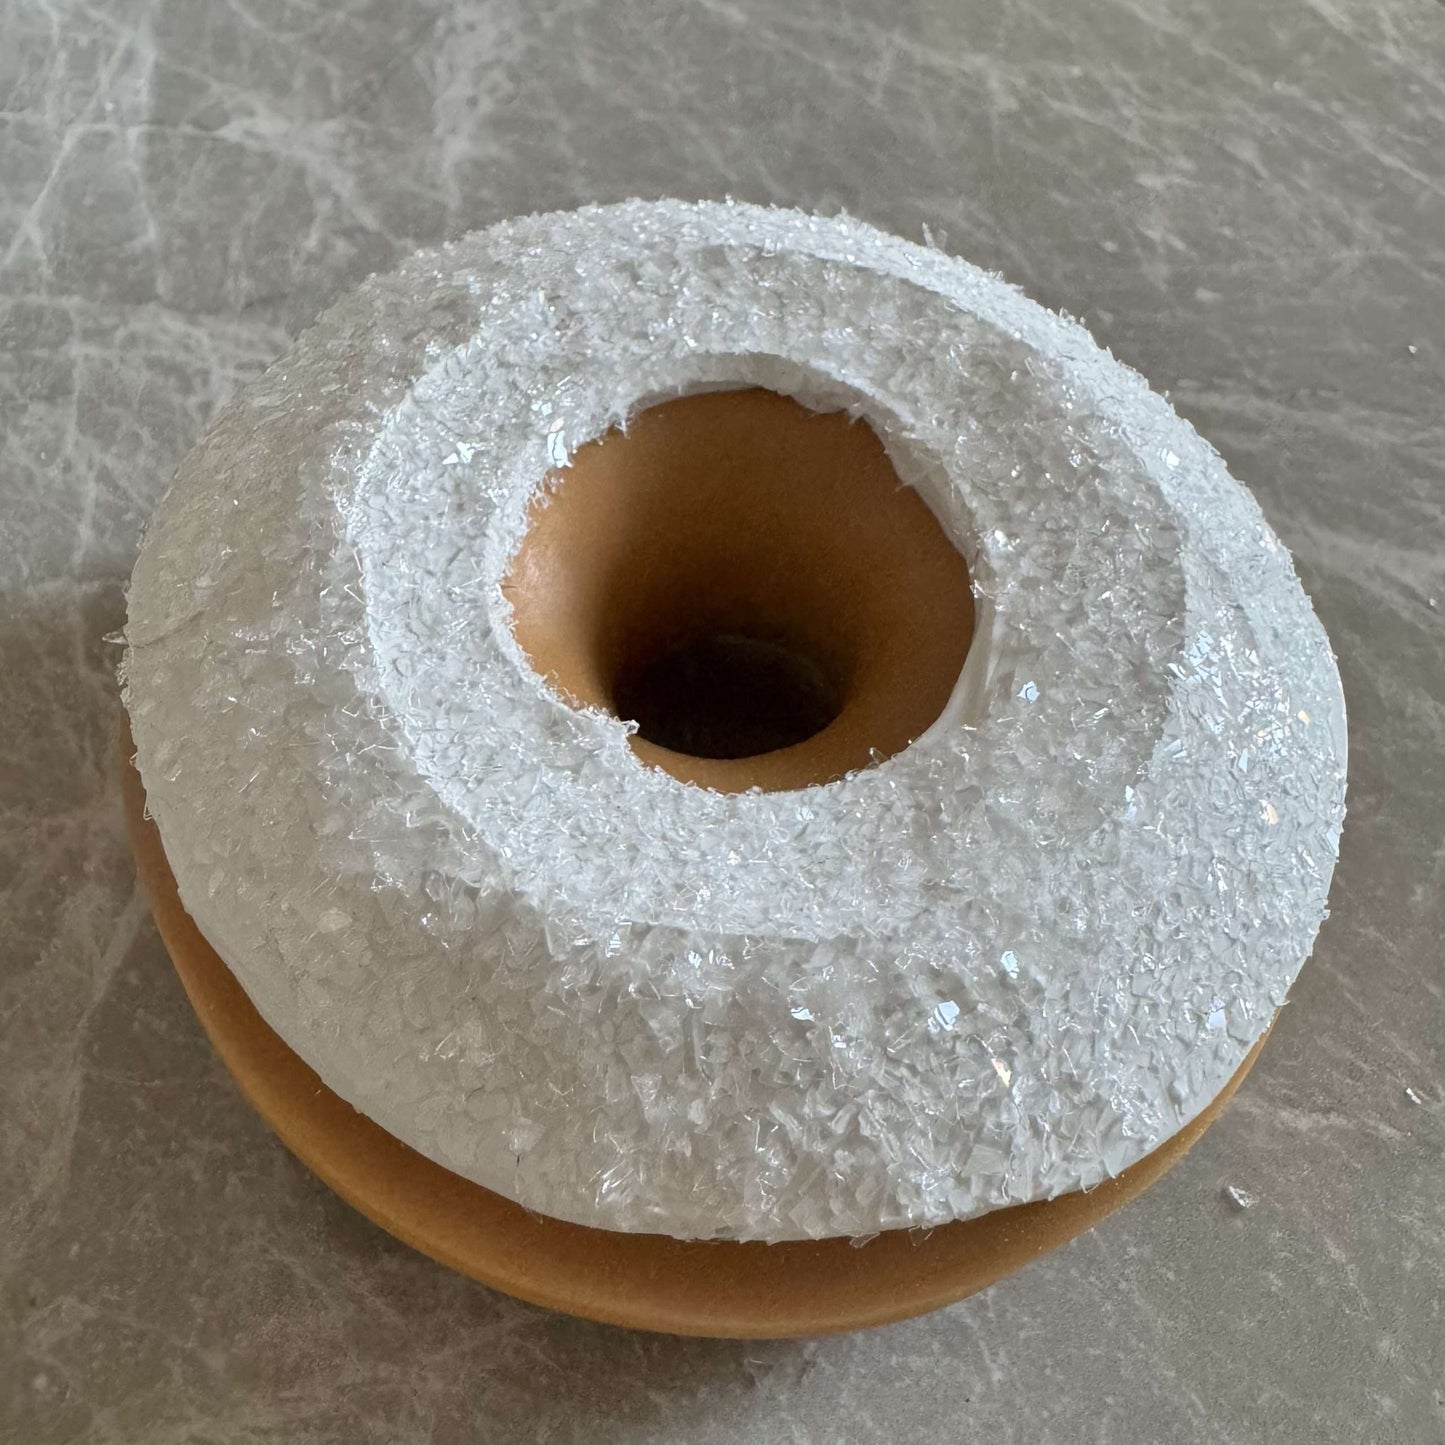 Donut with white icing and coconut powder